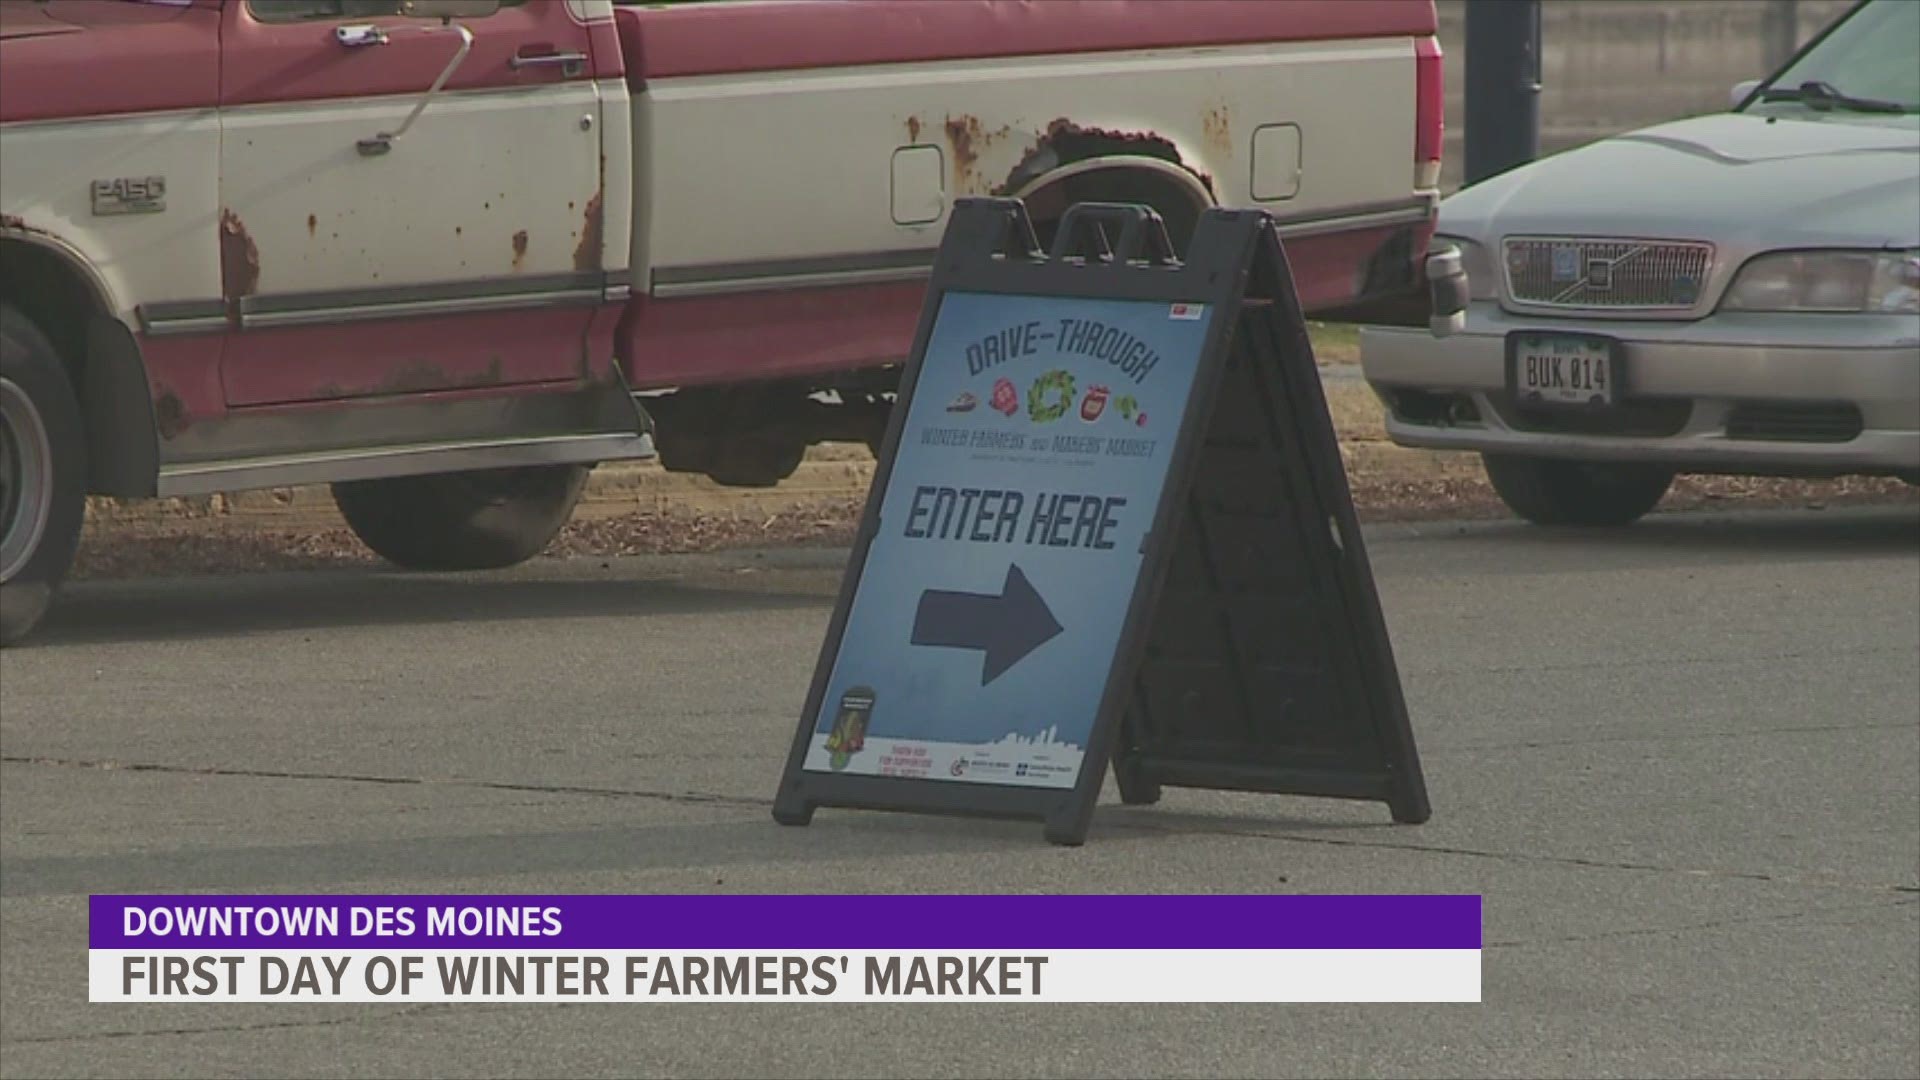 According to the Farmers' Market director, 550 cars came through the market Saturday.